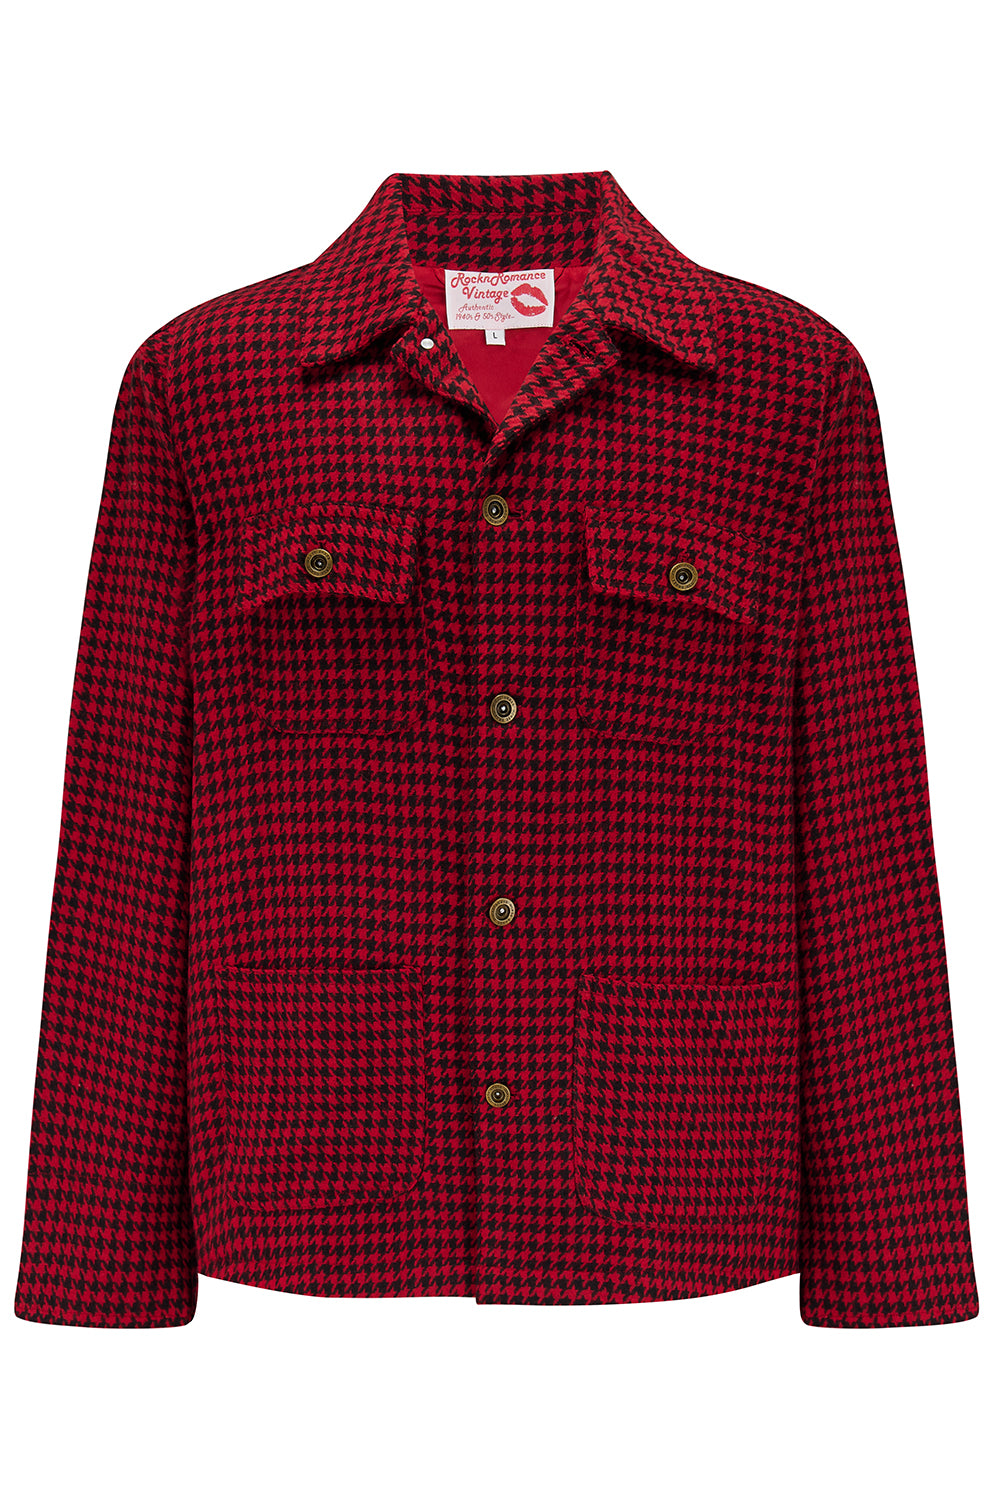 The "Bronson" Mens Chore Jacket In Red/Black Houndstooth, 100% Wool Outer .. 1950s Rockabilly Vintage Style